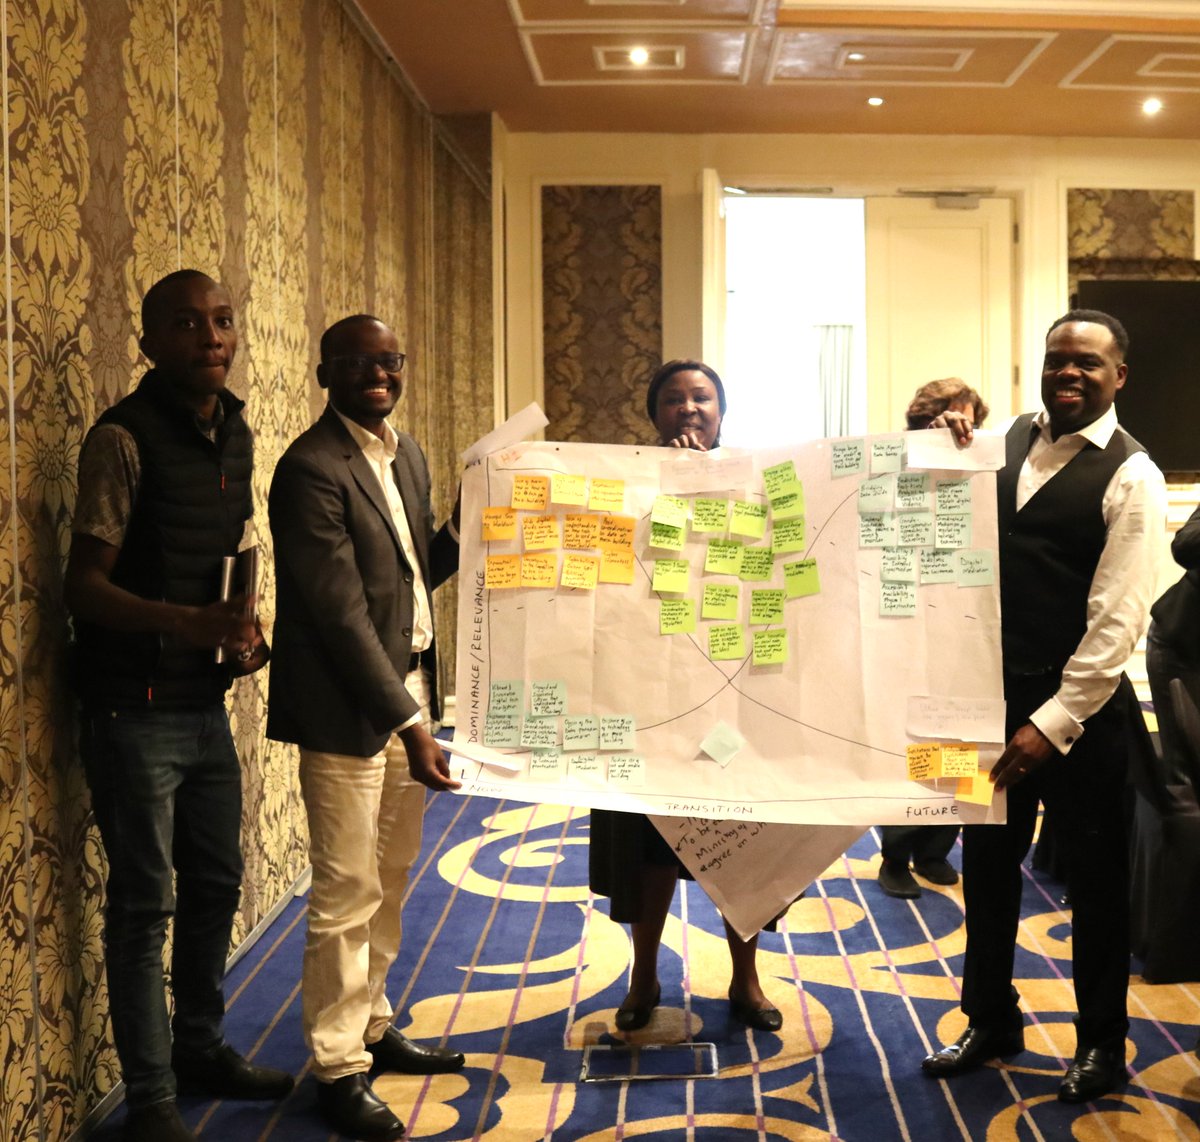 @UNPeacebuilding @ElizabethSpehar @UNDPPA @UnKenya @PeaceNet_Kenya @StateHouseKenya @OHCHRKENYA @UNDPKenya @pfps_kenya Day 2 of the 'Future Workshop' had participants engage in strategic conversations on actions and recommendations of a preferred Peace Building future for Kenya. Their contribution will advise the Peacebuilding Architecture review process which is currently ongoing. #AmaniPamoja